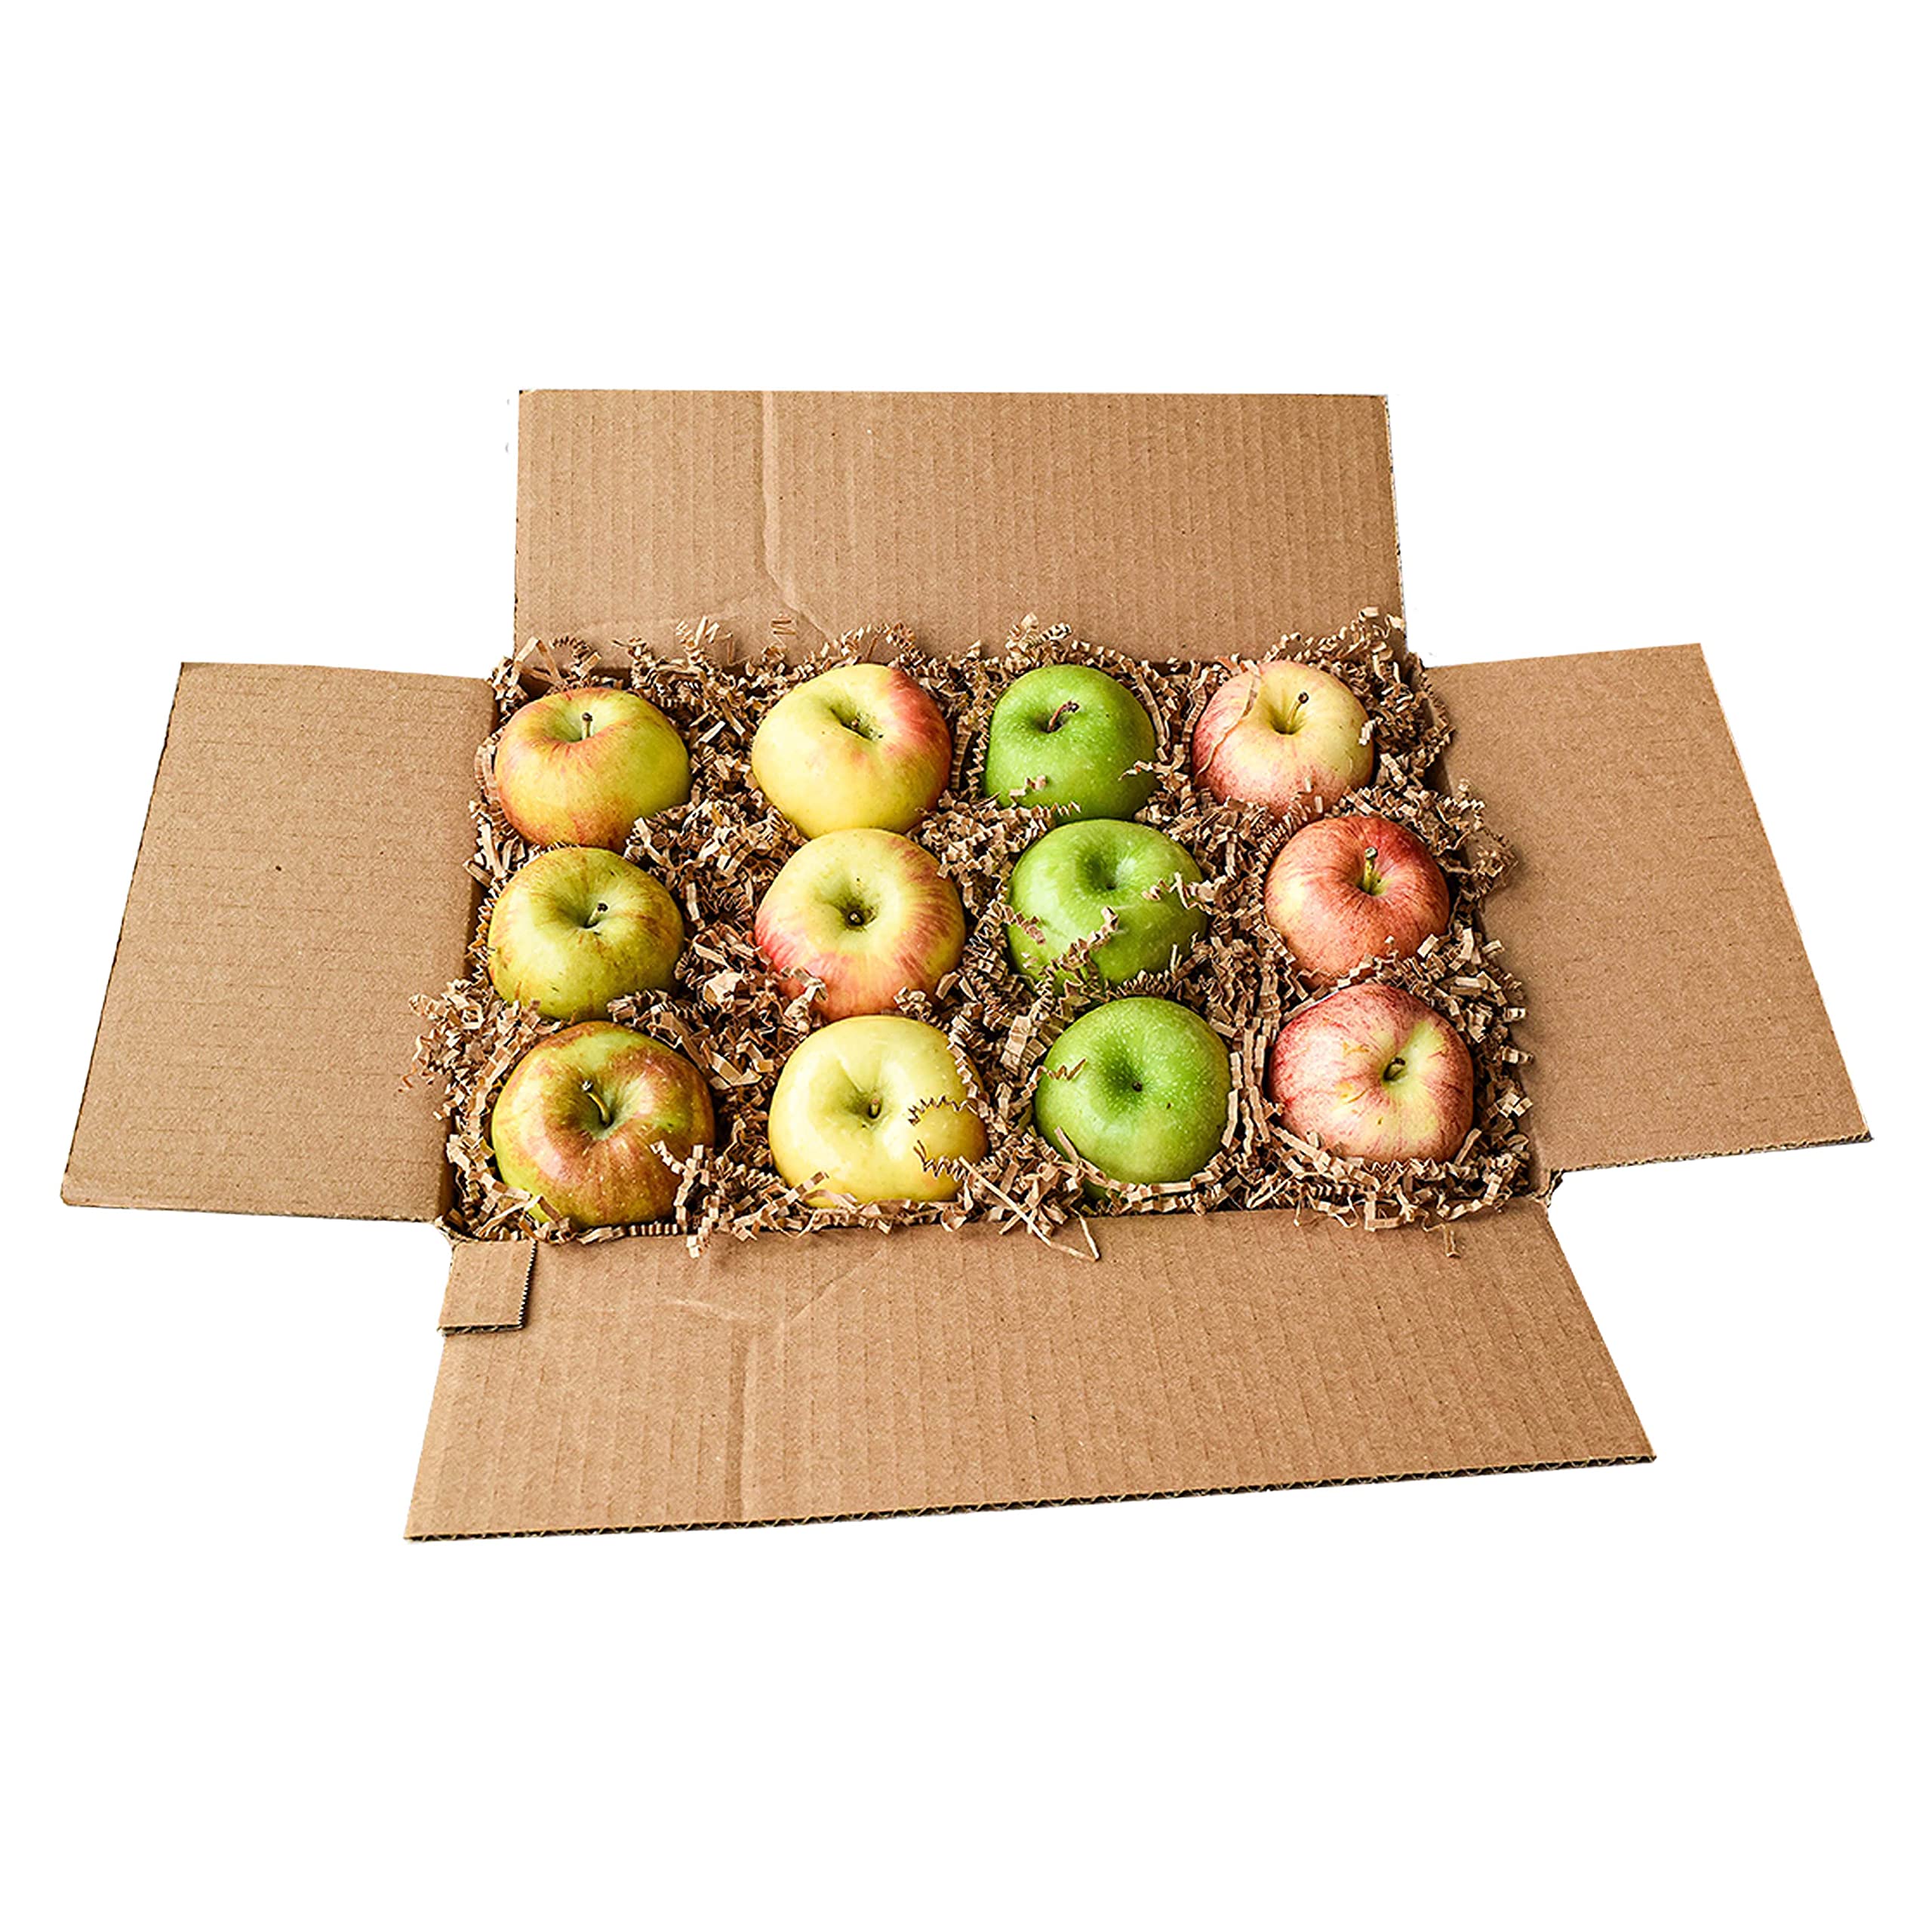 Farm Produce Direct, 12 Count Apple Sampler, with 3 Honey Crisp, 3 Fuji, 3 Granny Smith, 3 Gala Orchard Fresh Apples, from Capital City Fruit. Perf...